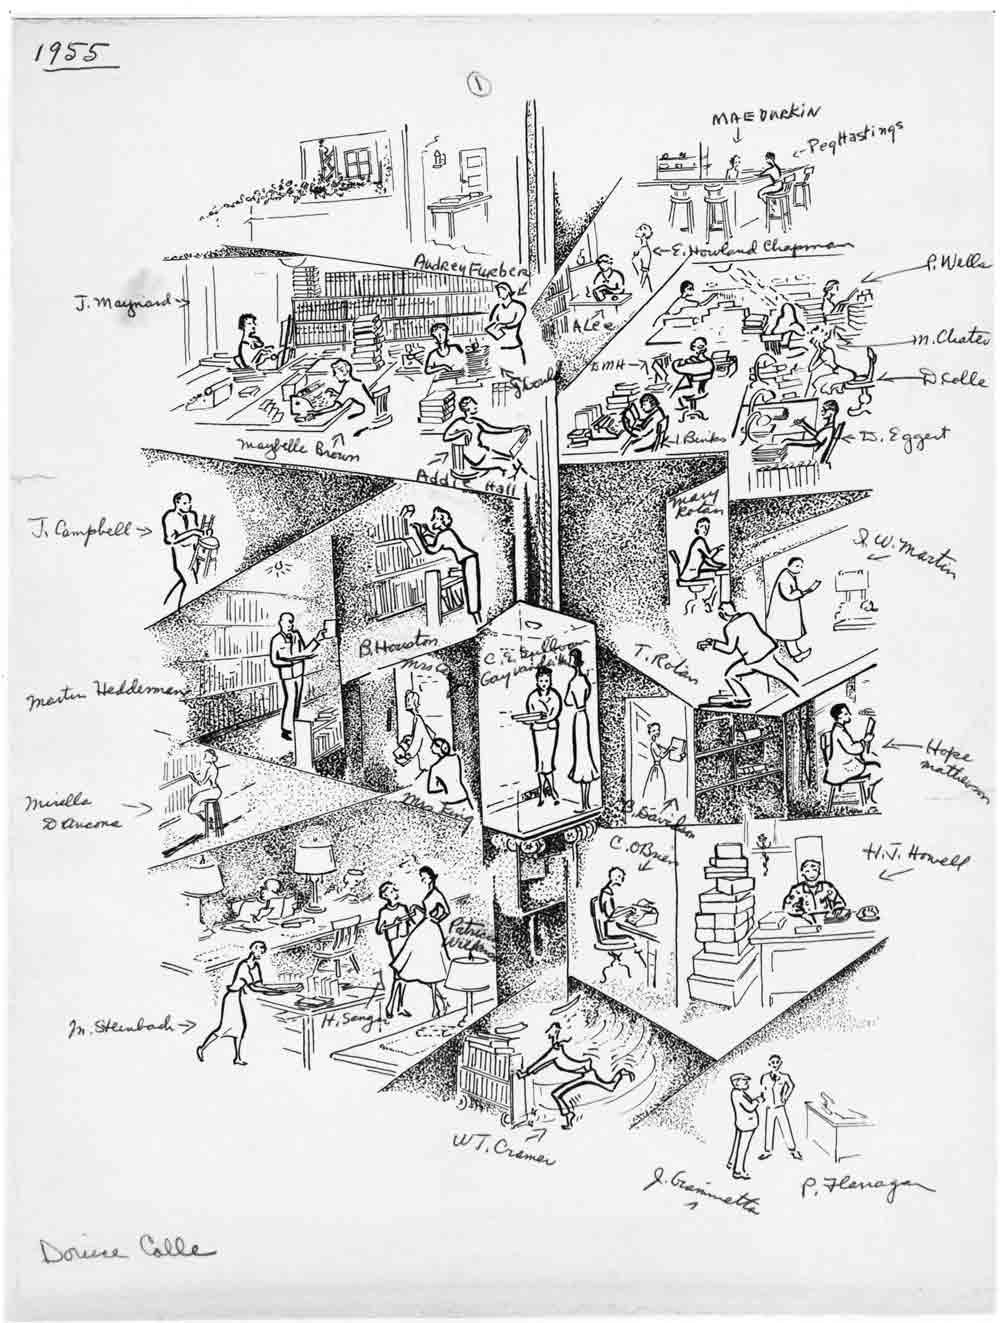 Cartoonish drawing of a cross-section of a library building, with labeled figures at work at various library tasks